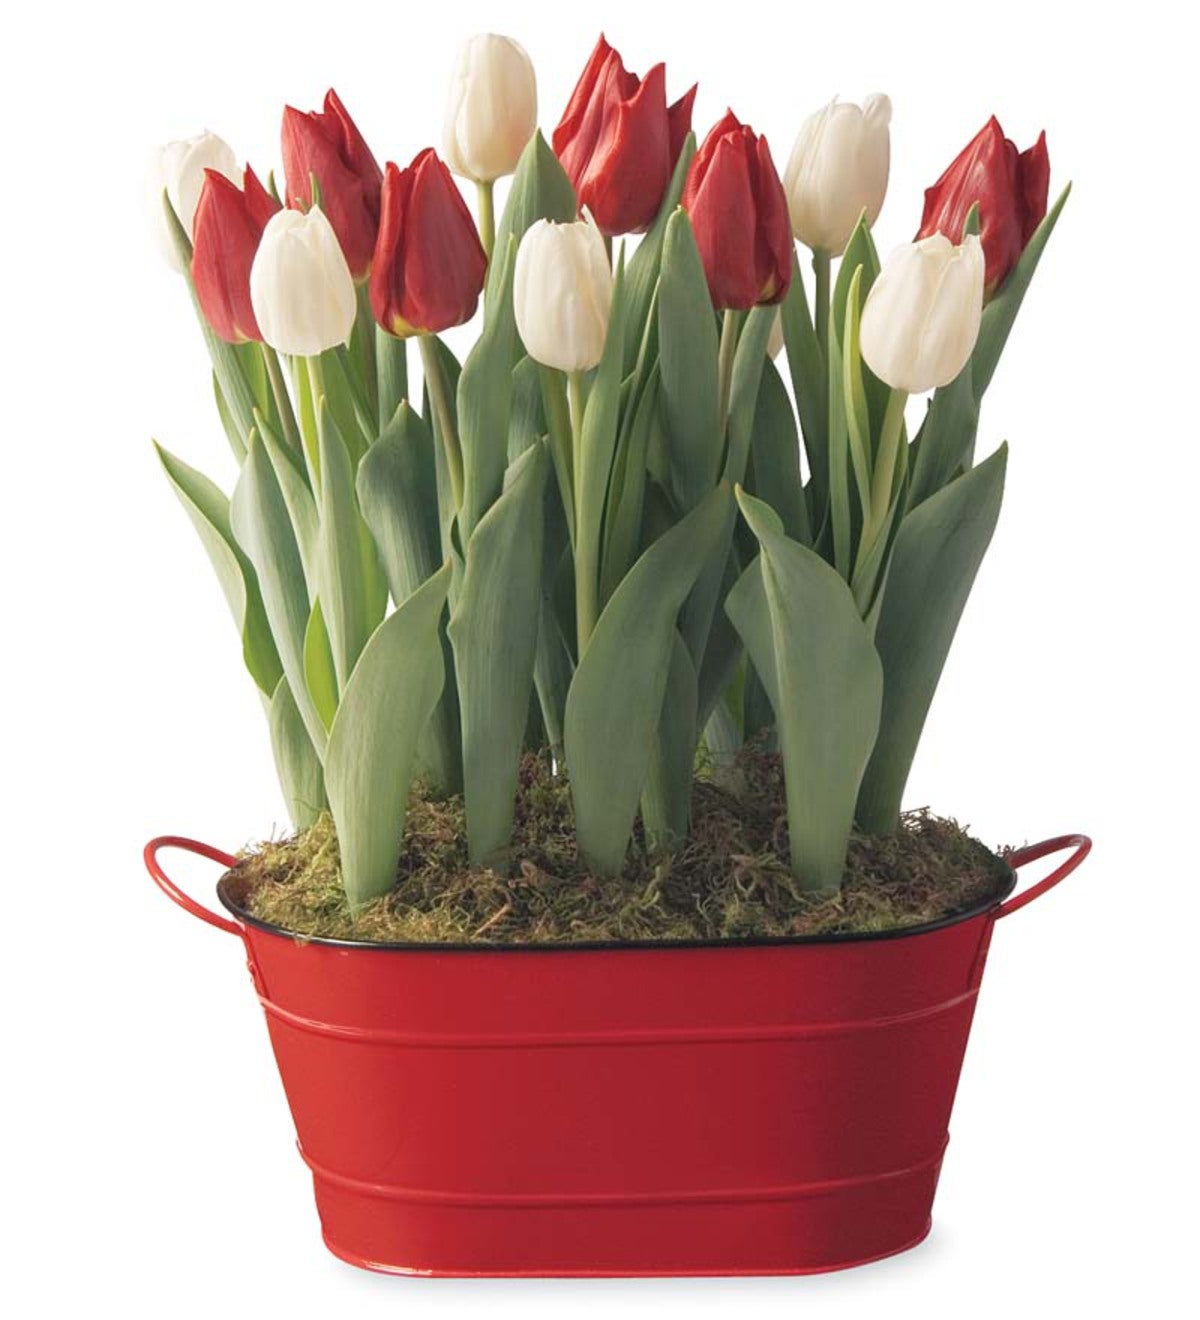 Red and White Tulip Bulb Garden - Available To Ship Beginning November 21st